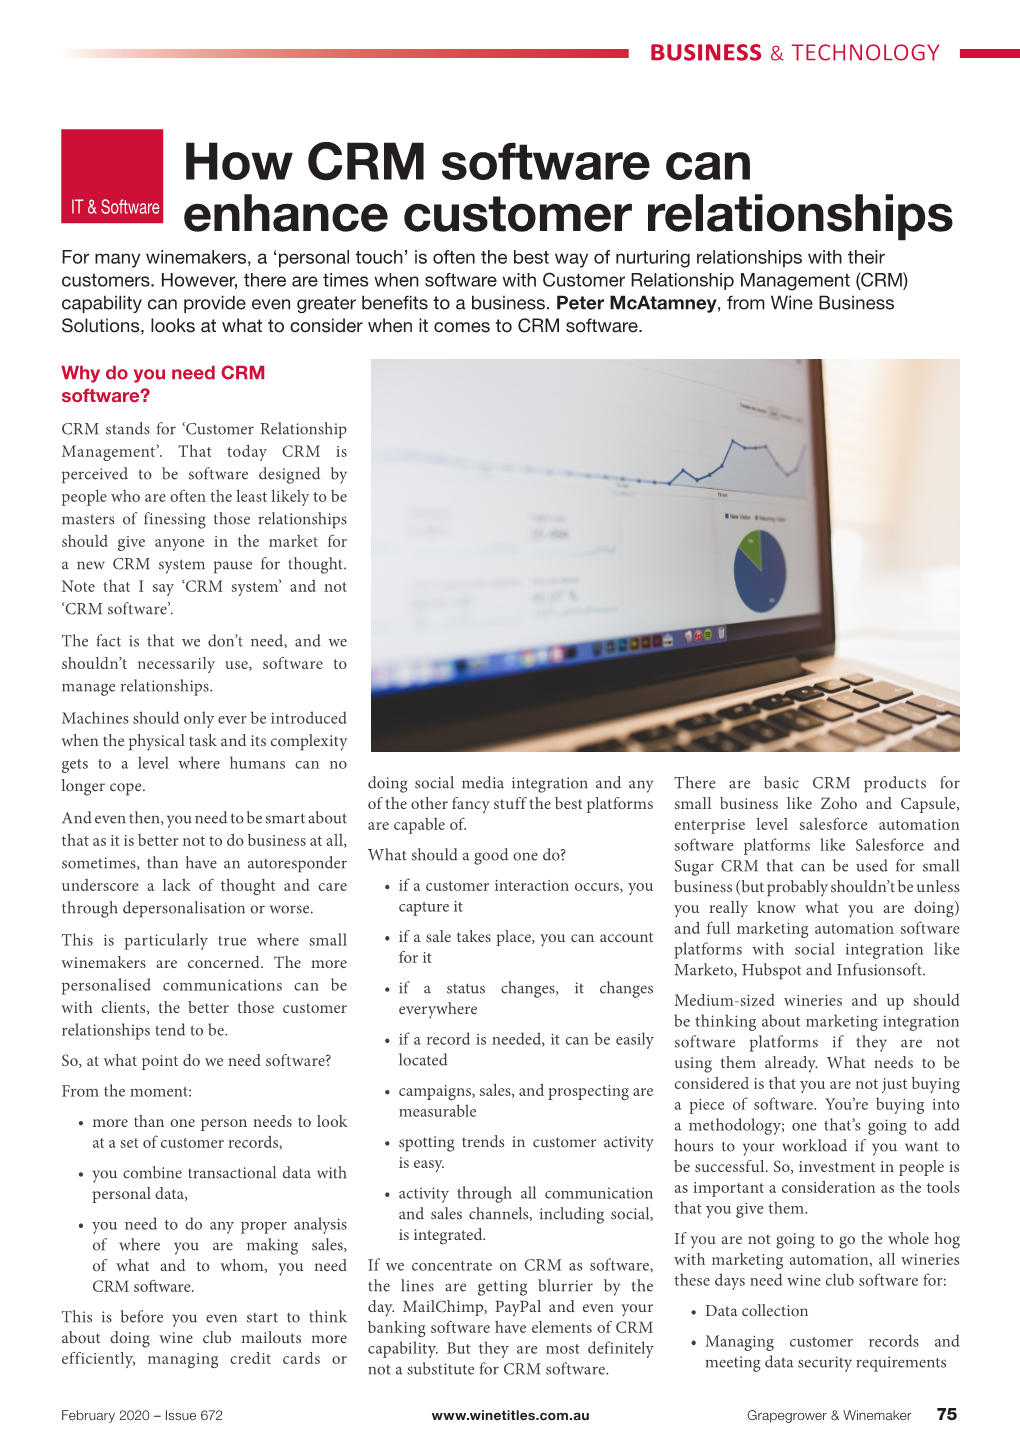 How CRM Software Can Enhance Customer Relationships